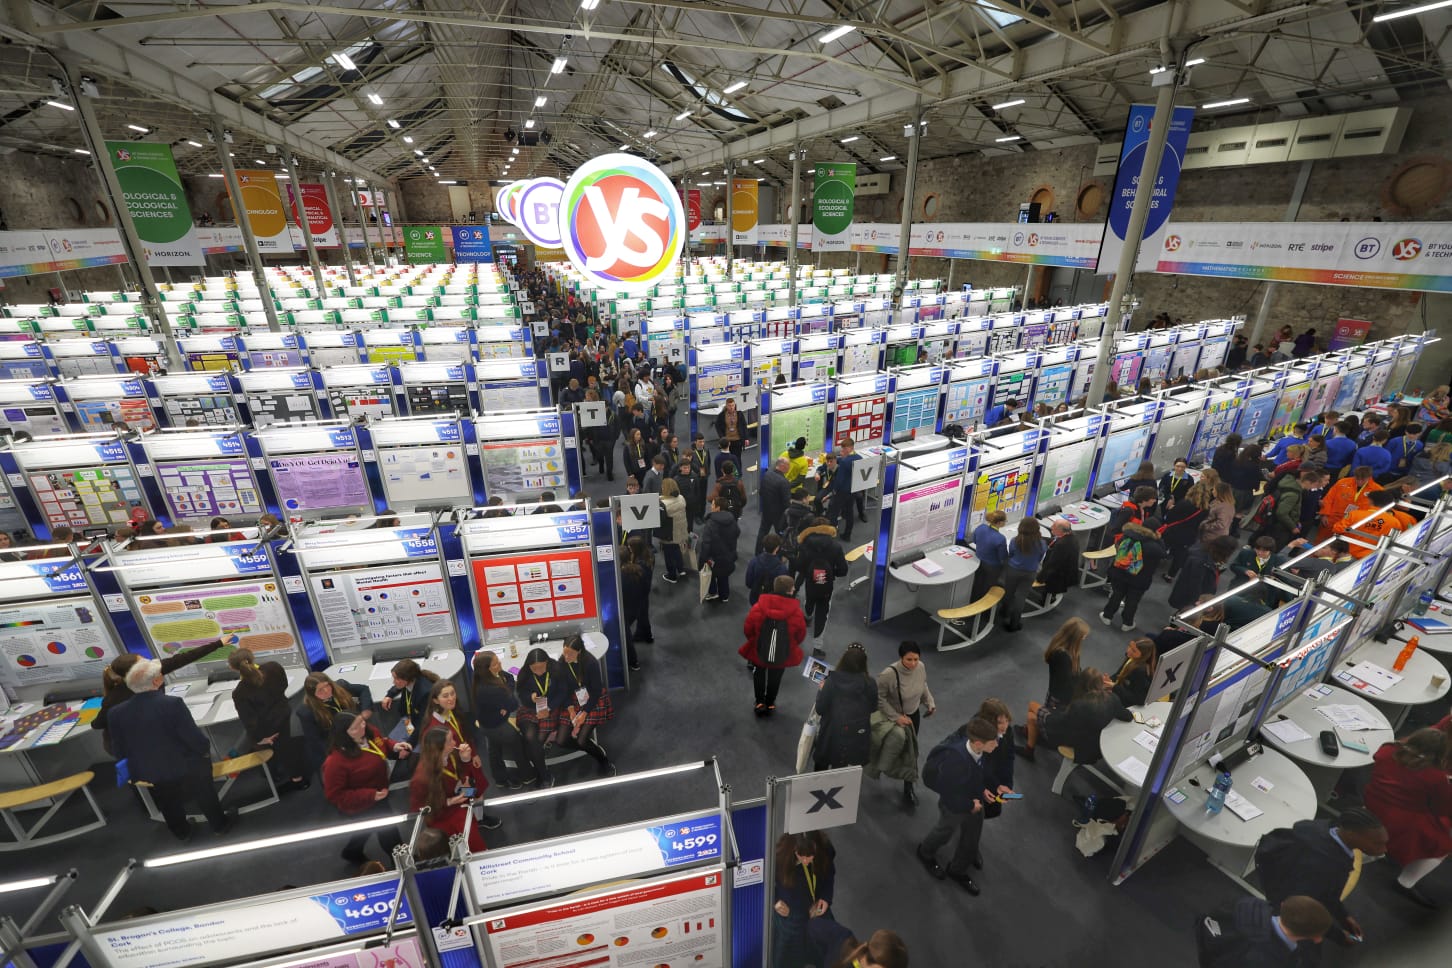 PRIMARY SCIENCE FAIR GETS UNDERWAY AT DAY 2 OF THE BT YOUNG SCIENTIST & TECHNOLOGY EXHIBITION 2023